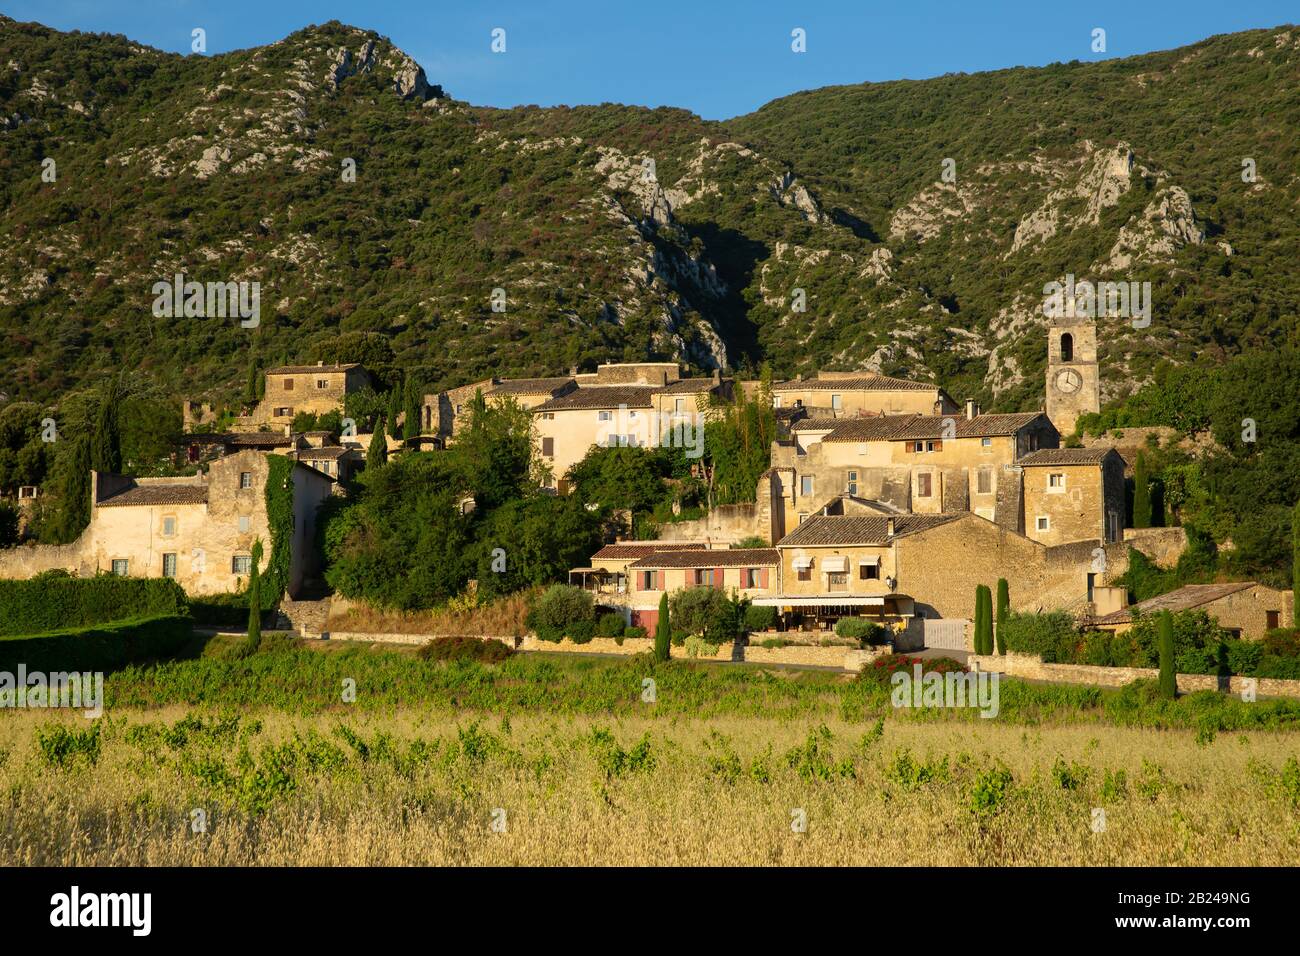 Panoramic view of the the minuscule old hilltop village of Maubec-Vieux, with beautiful stone houses with blue shutters, Luberon, Provence, France Stock Photo